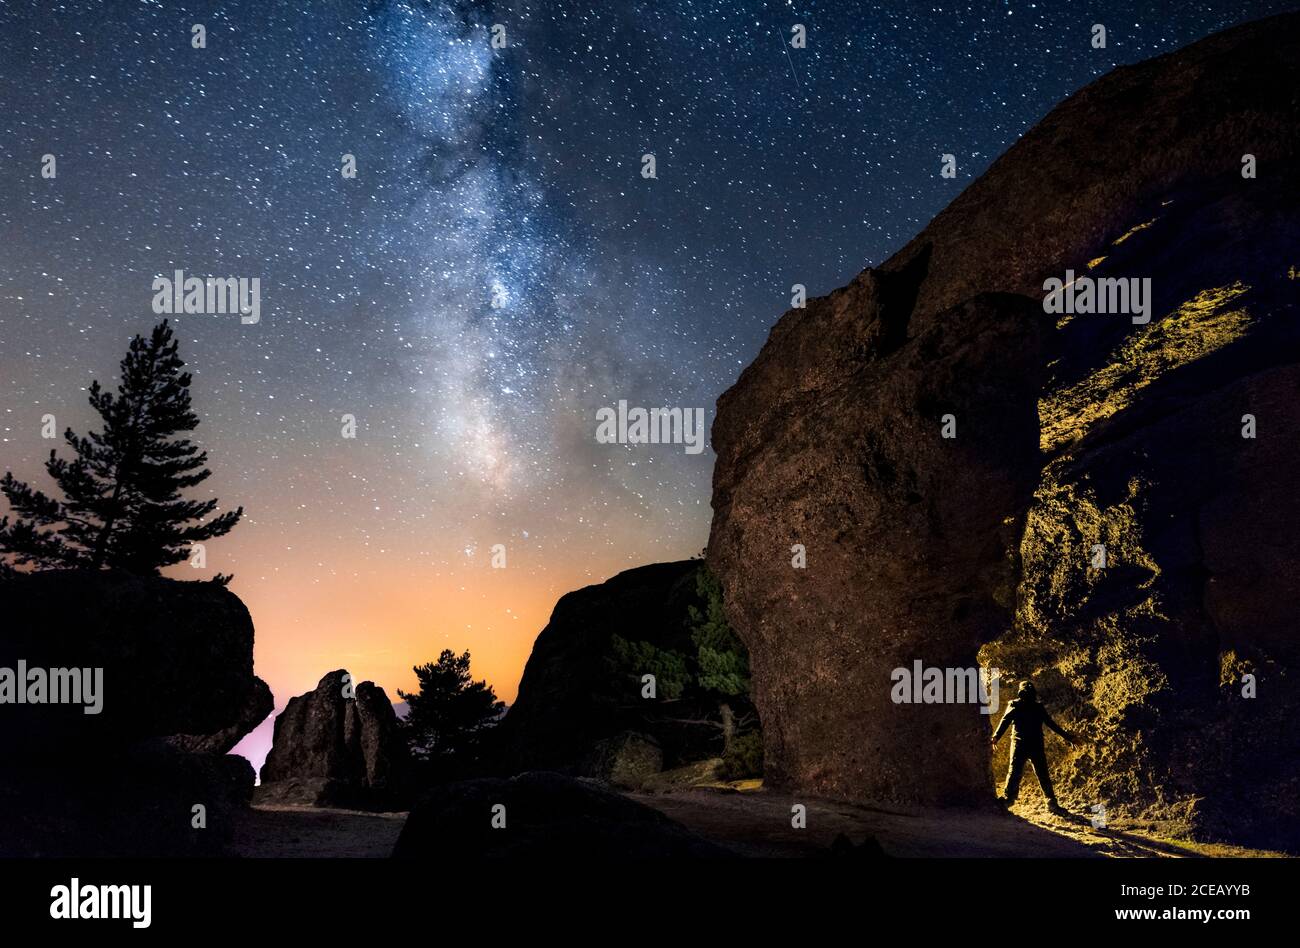 Silhouette of a man in the night exploring a cave in the mountain with a torch under an amazing the milky way. Soria, Spain Stock Photo